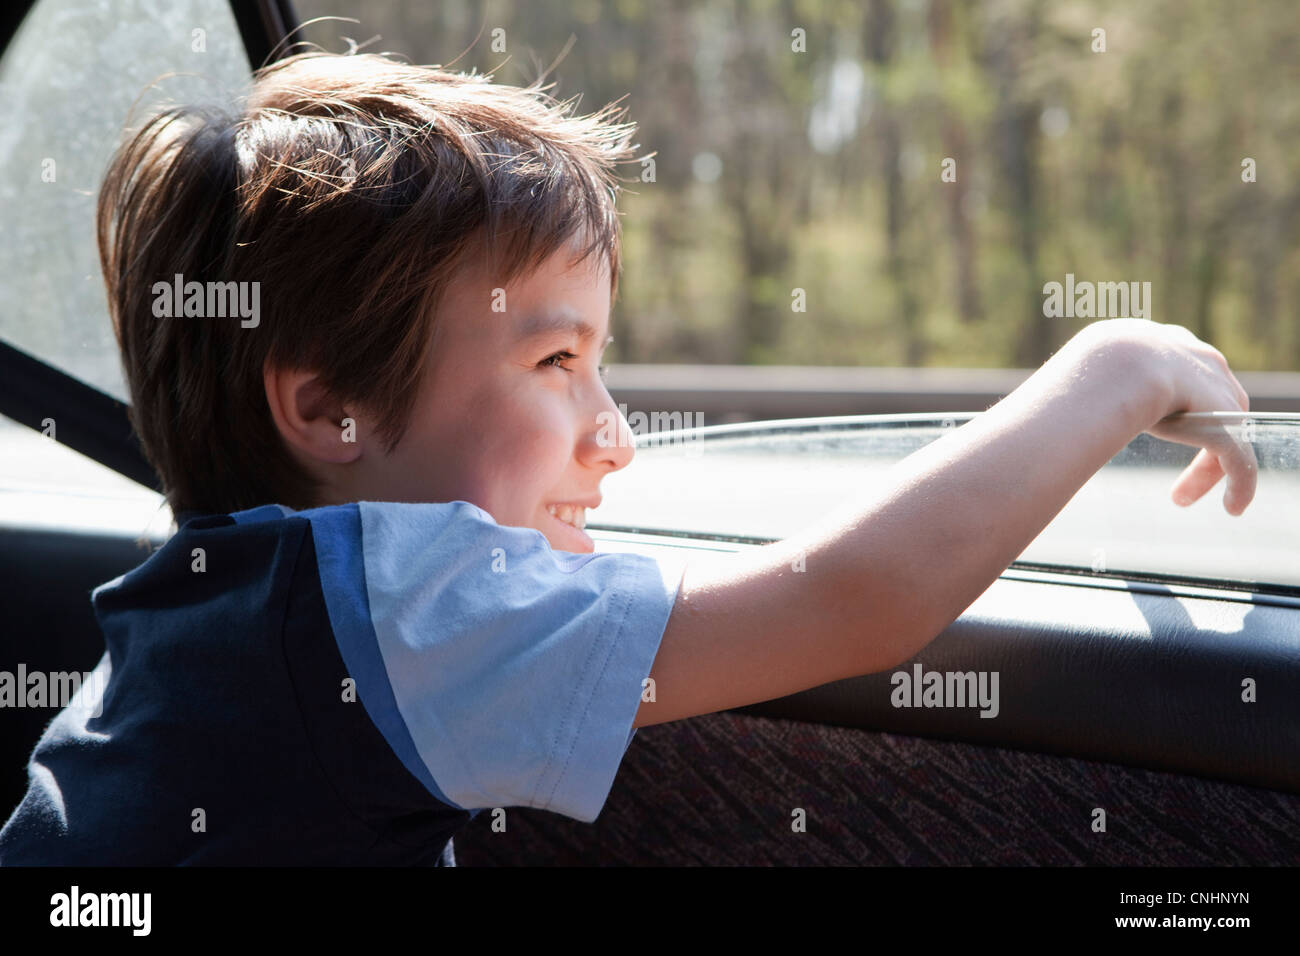 A child looking out a car window Stock Photo